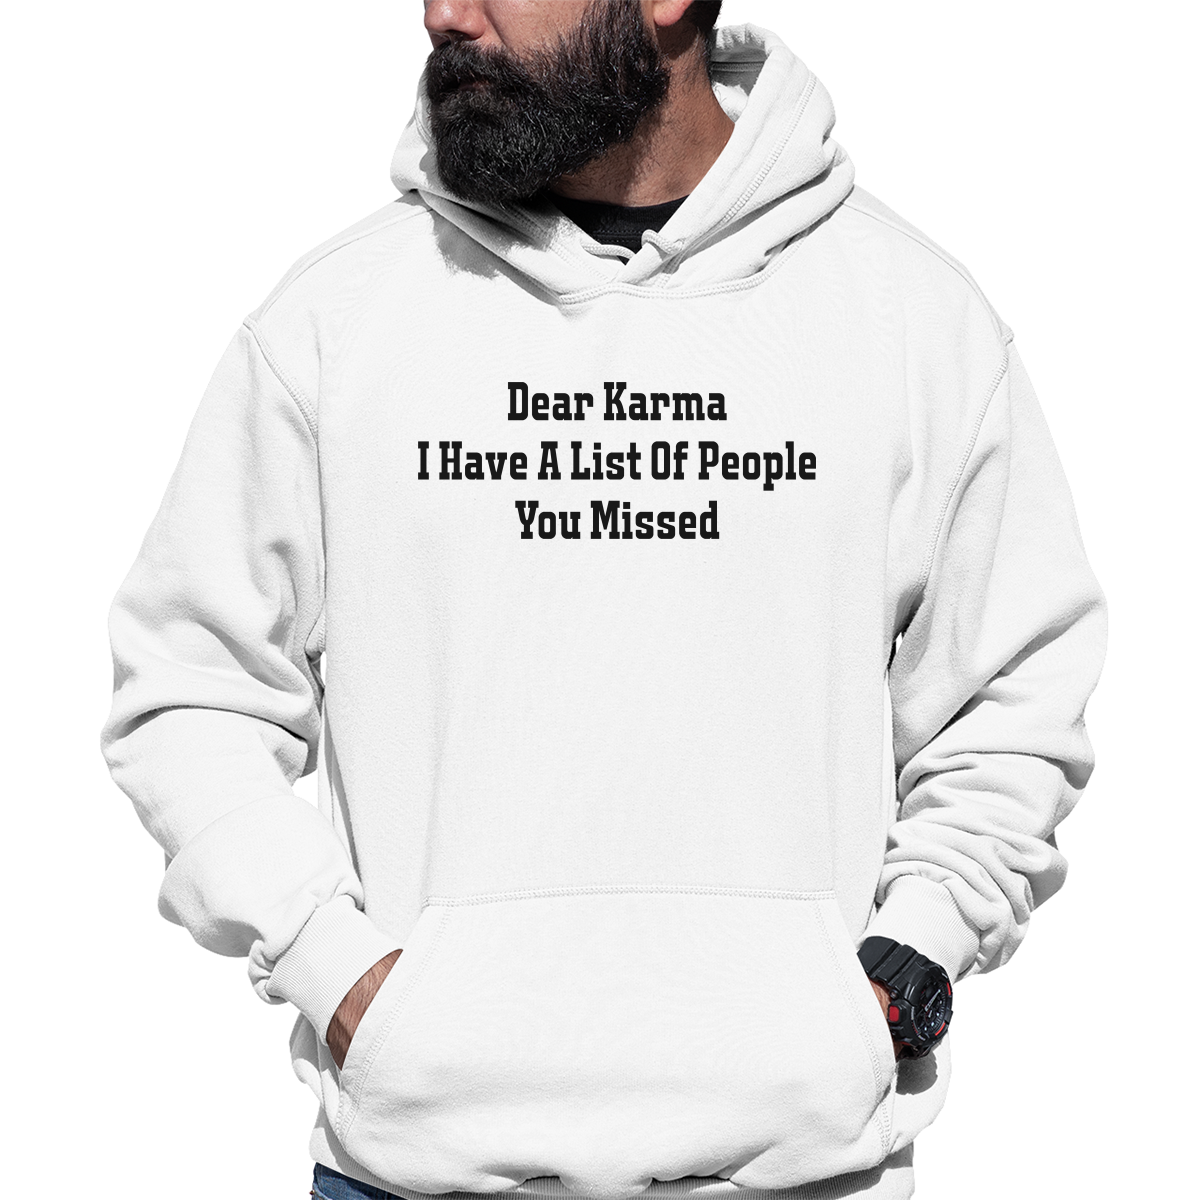 Dear Karma I Have A List Of People You Missed Unisex Hoodie | White